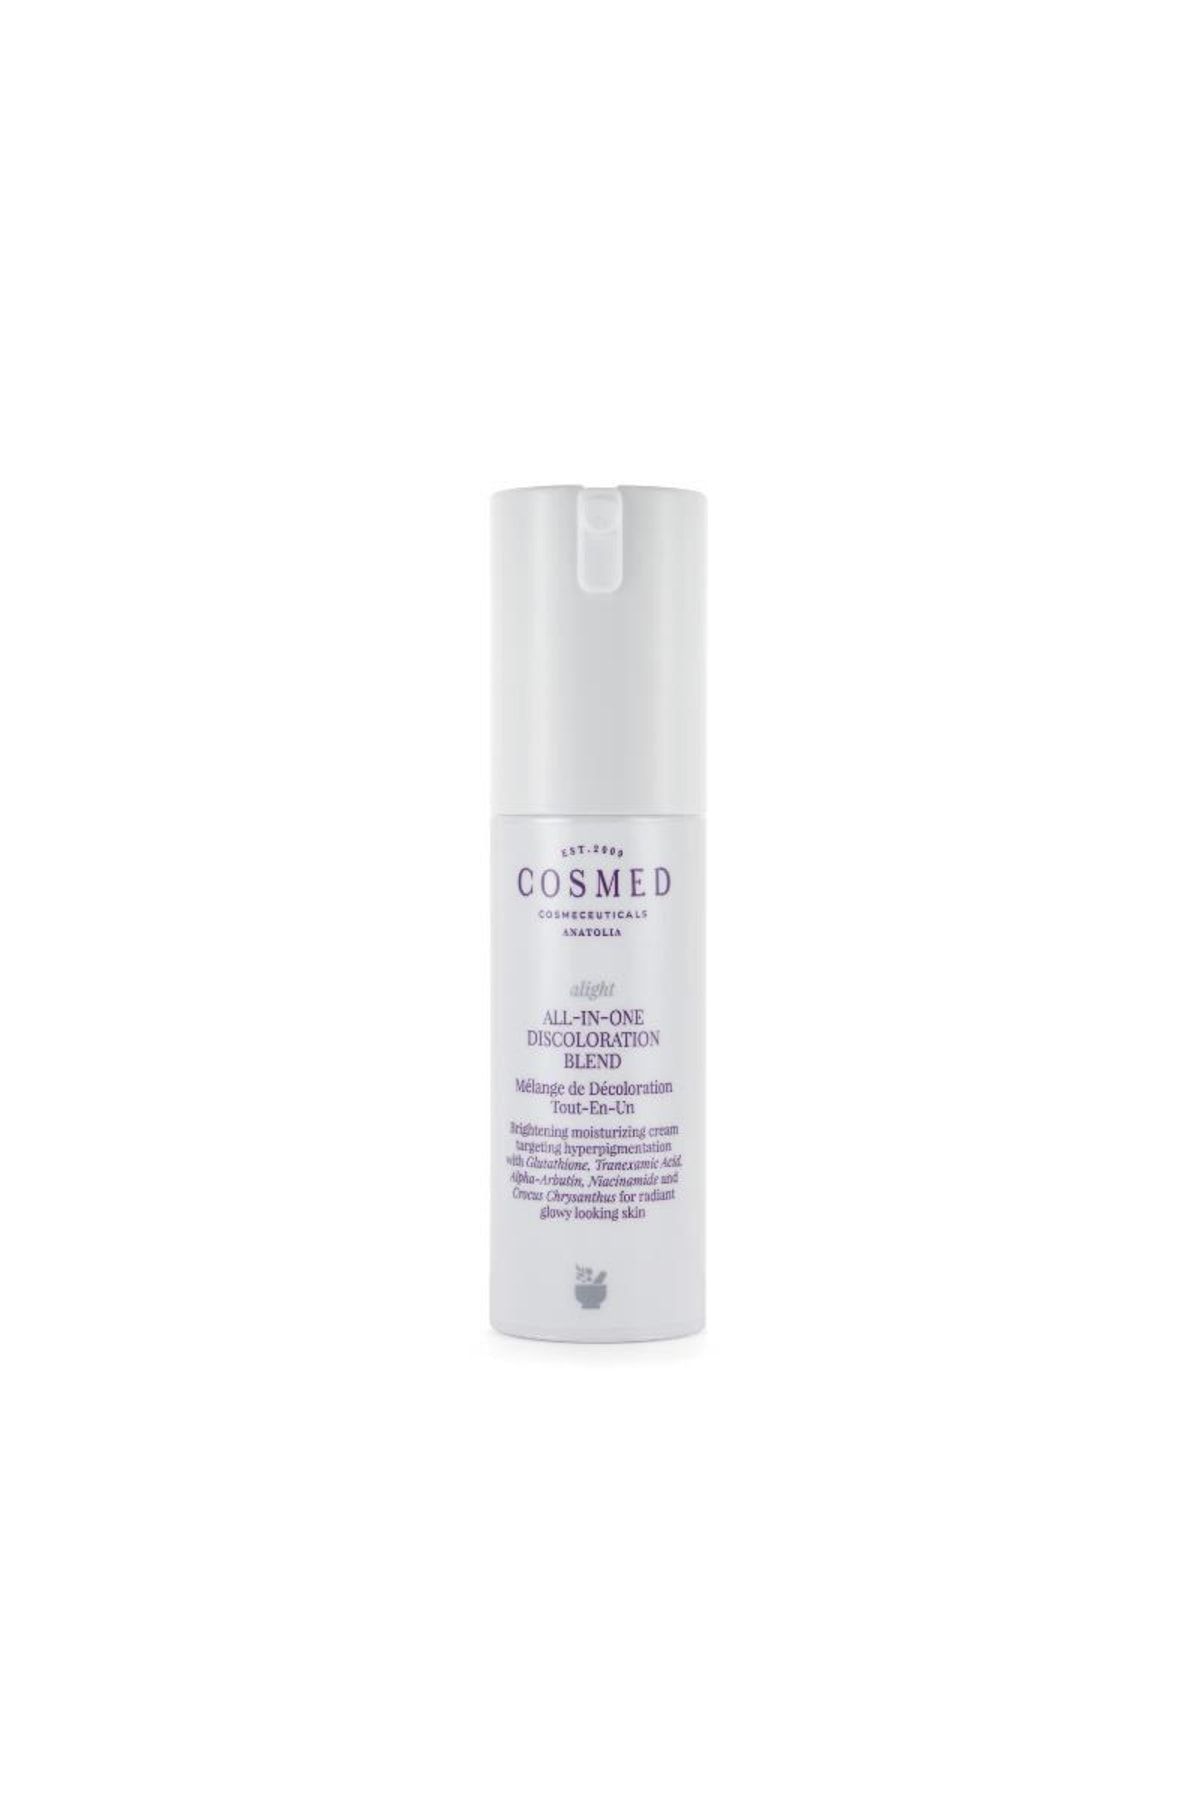 COSMED Alight All-in-one Discoloration Blend 30 Ml